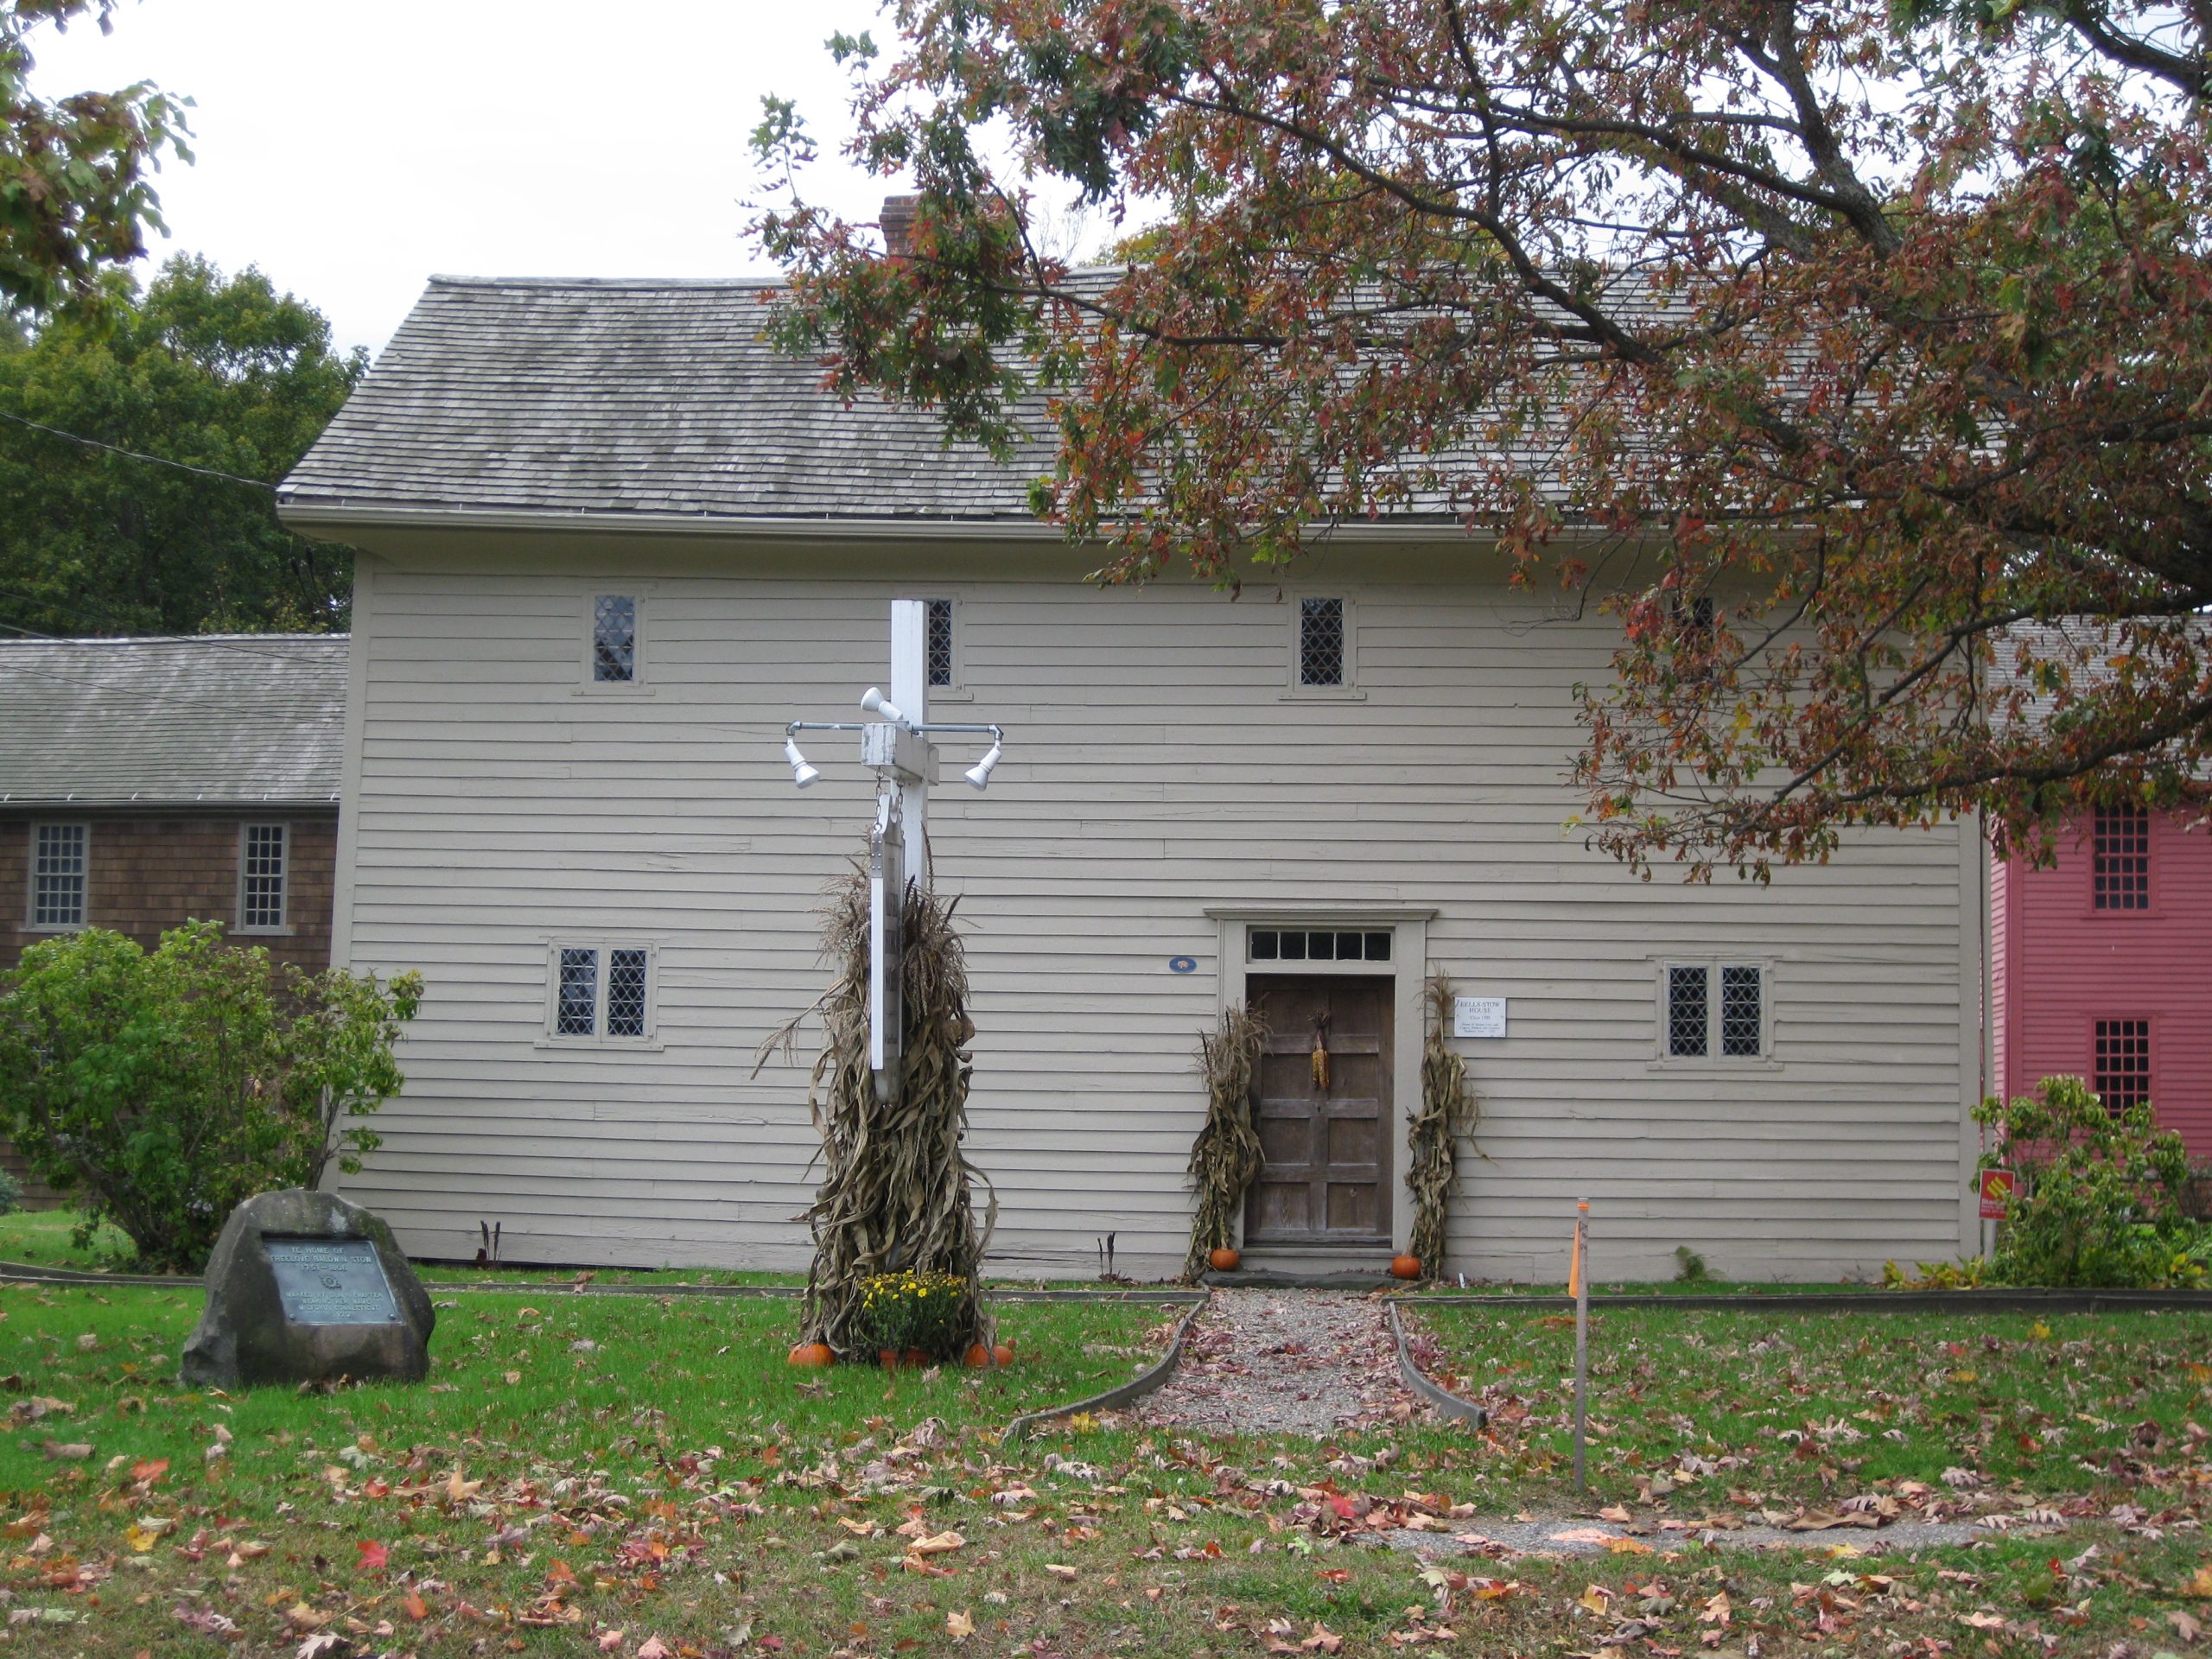 Eells-stow House &#8211; Circa 1700 (user submitted)